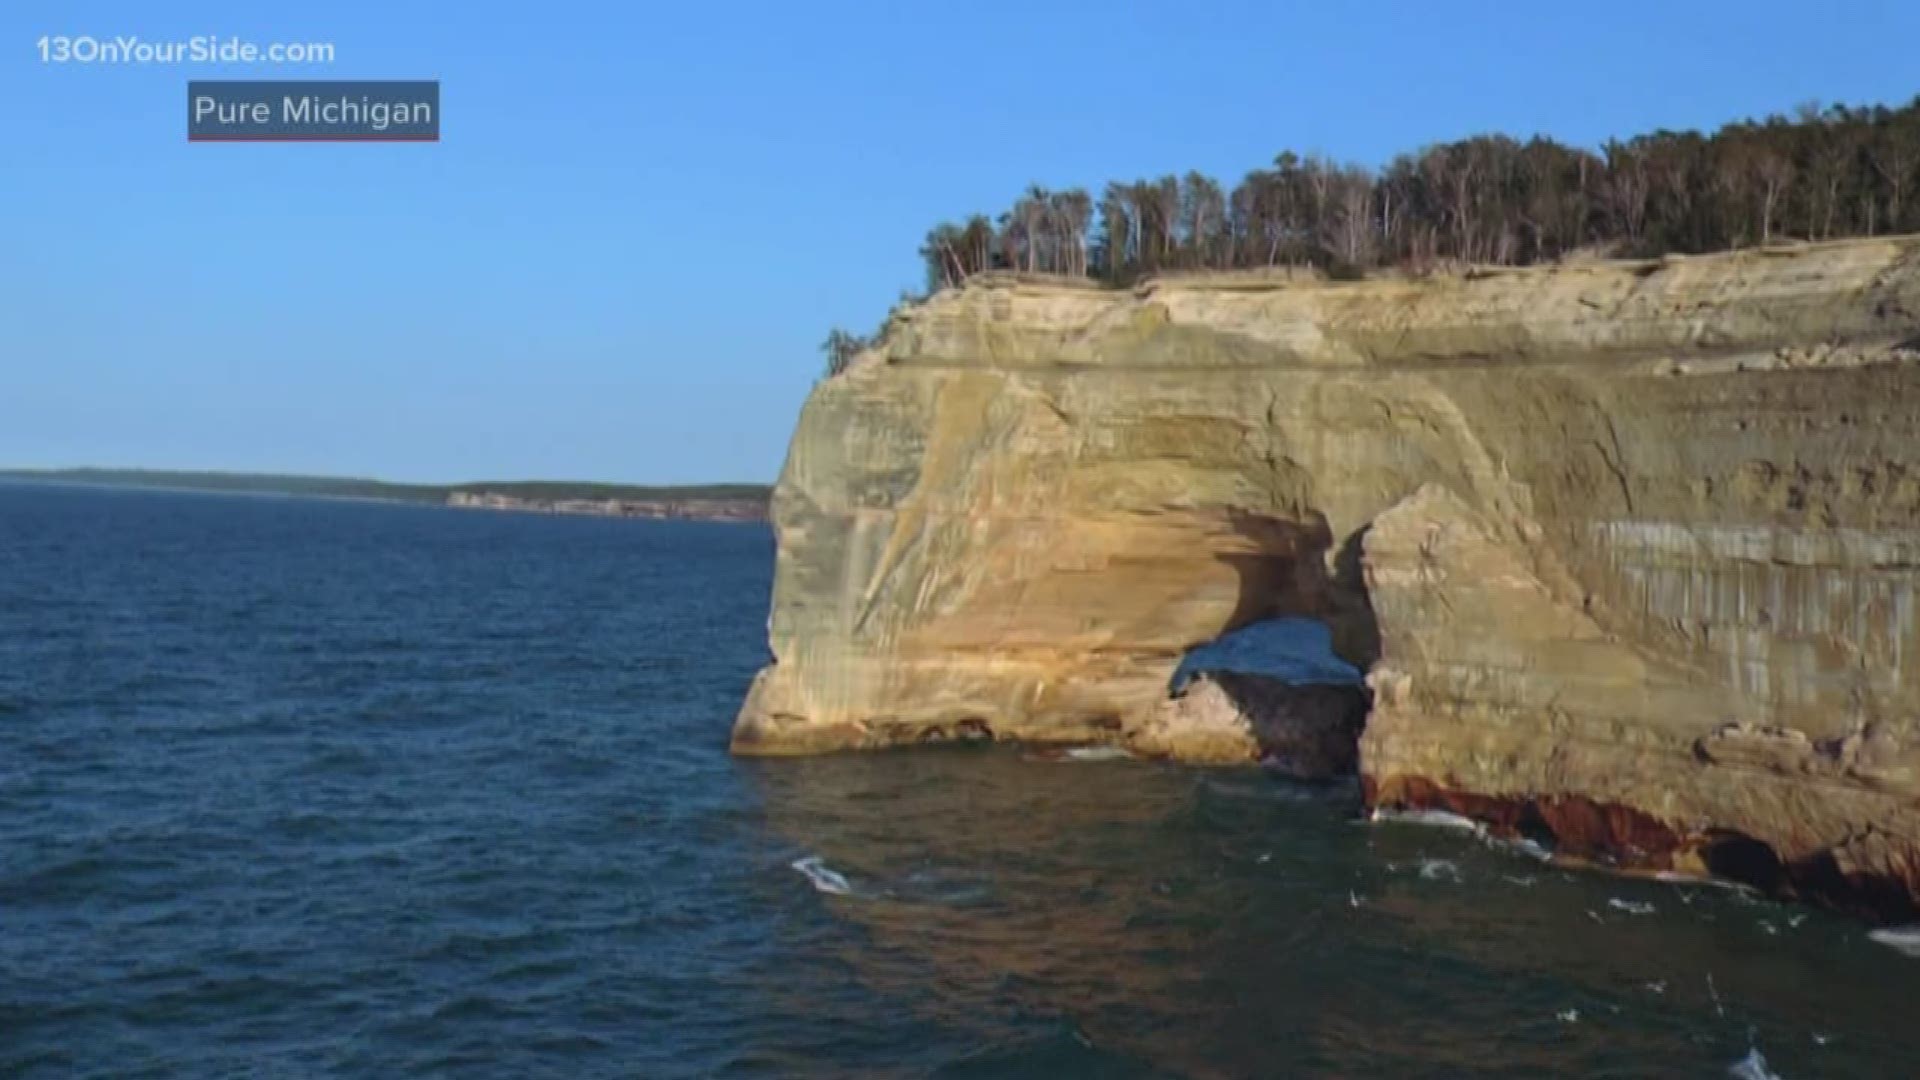 Dave Lorenz, with Pure Michigan, joined 13 ON YOUR SIDE to share Michigan's iconic places.